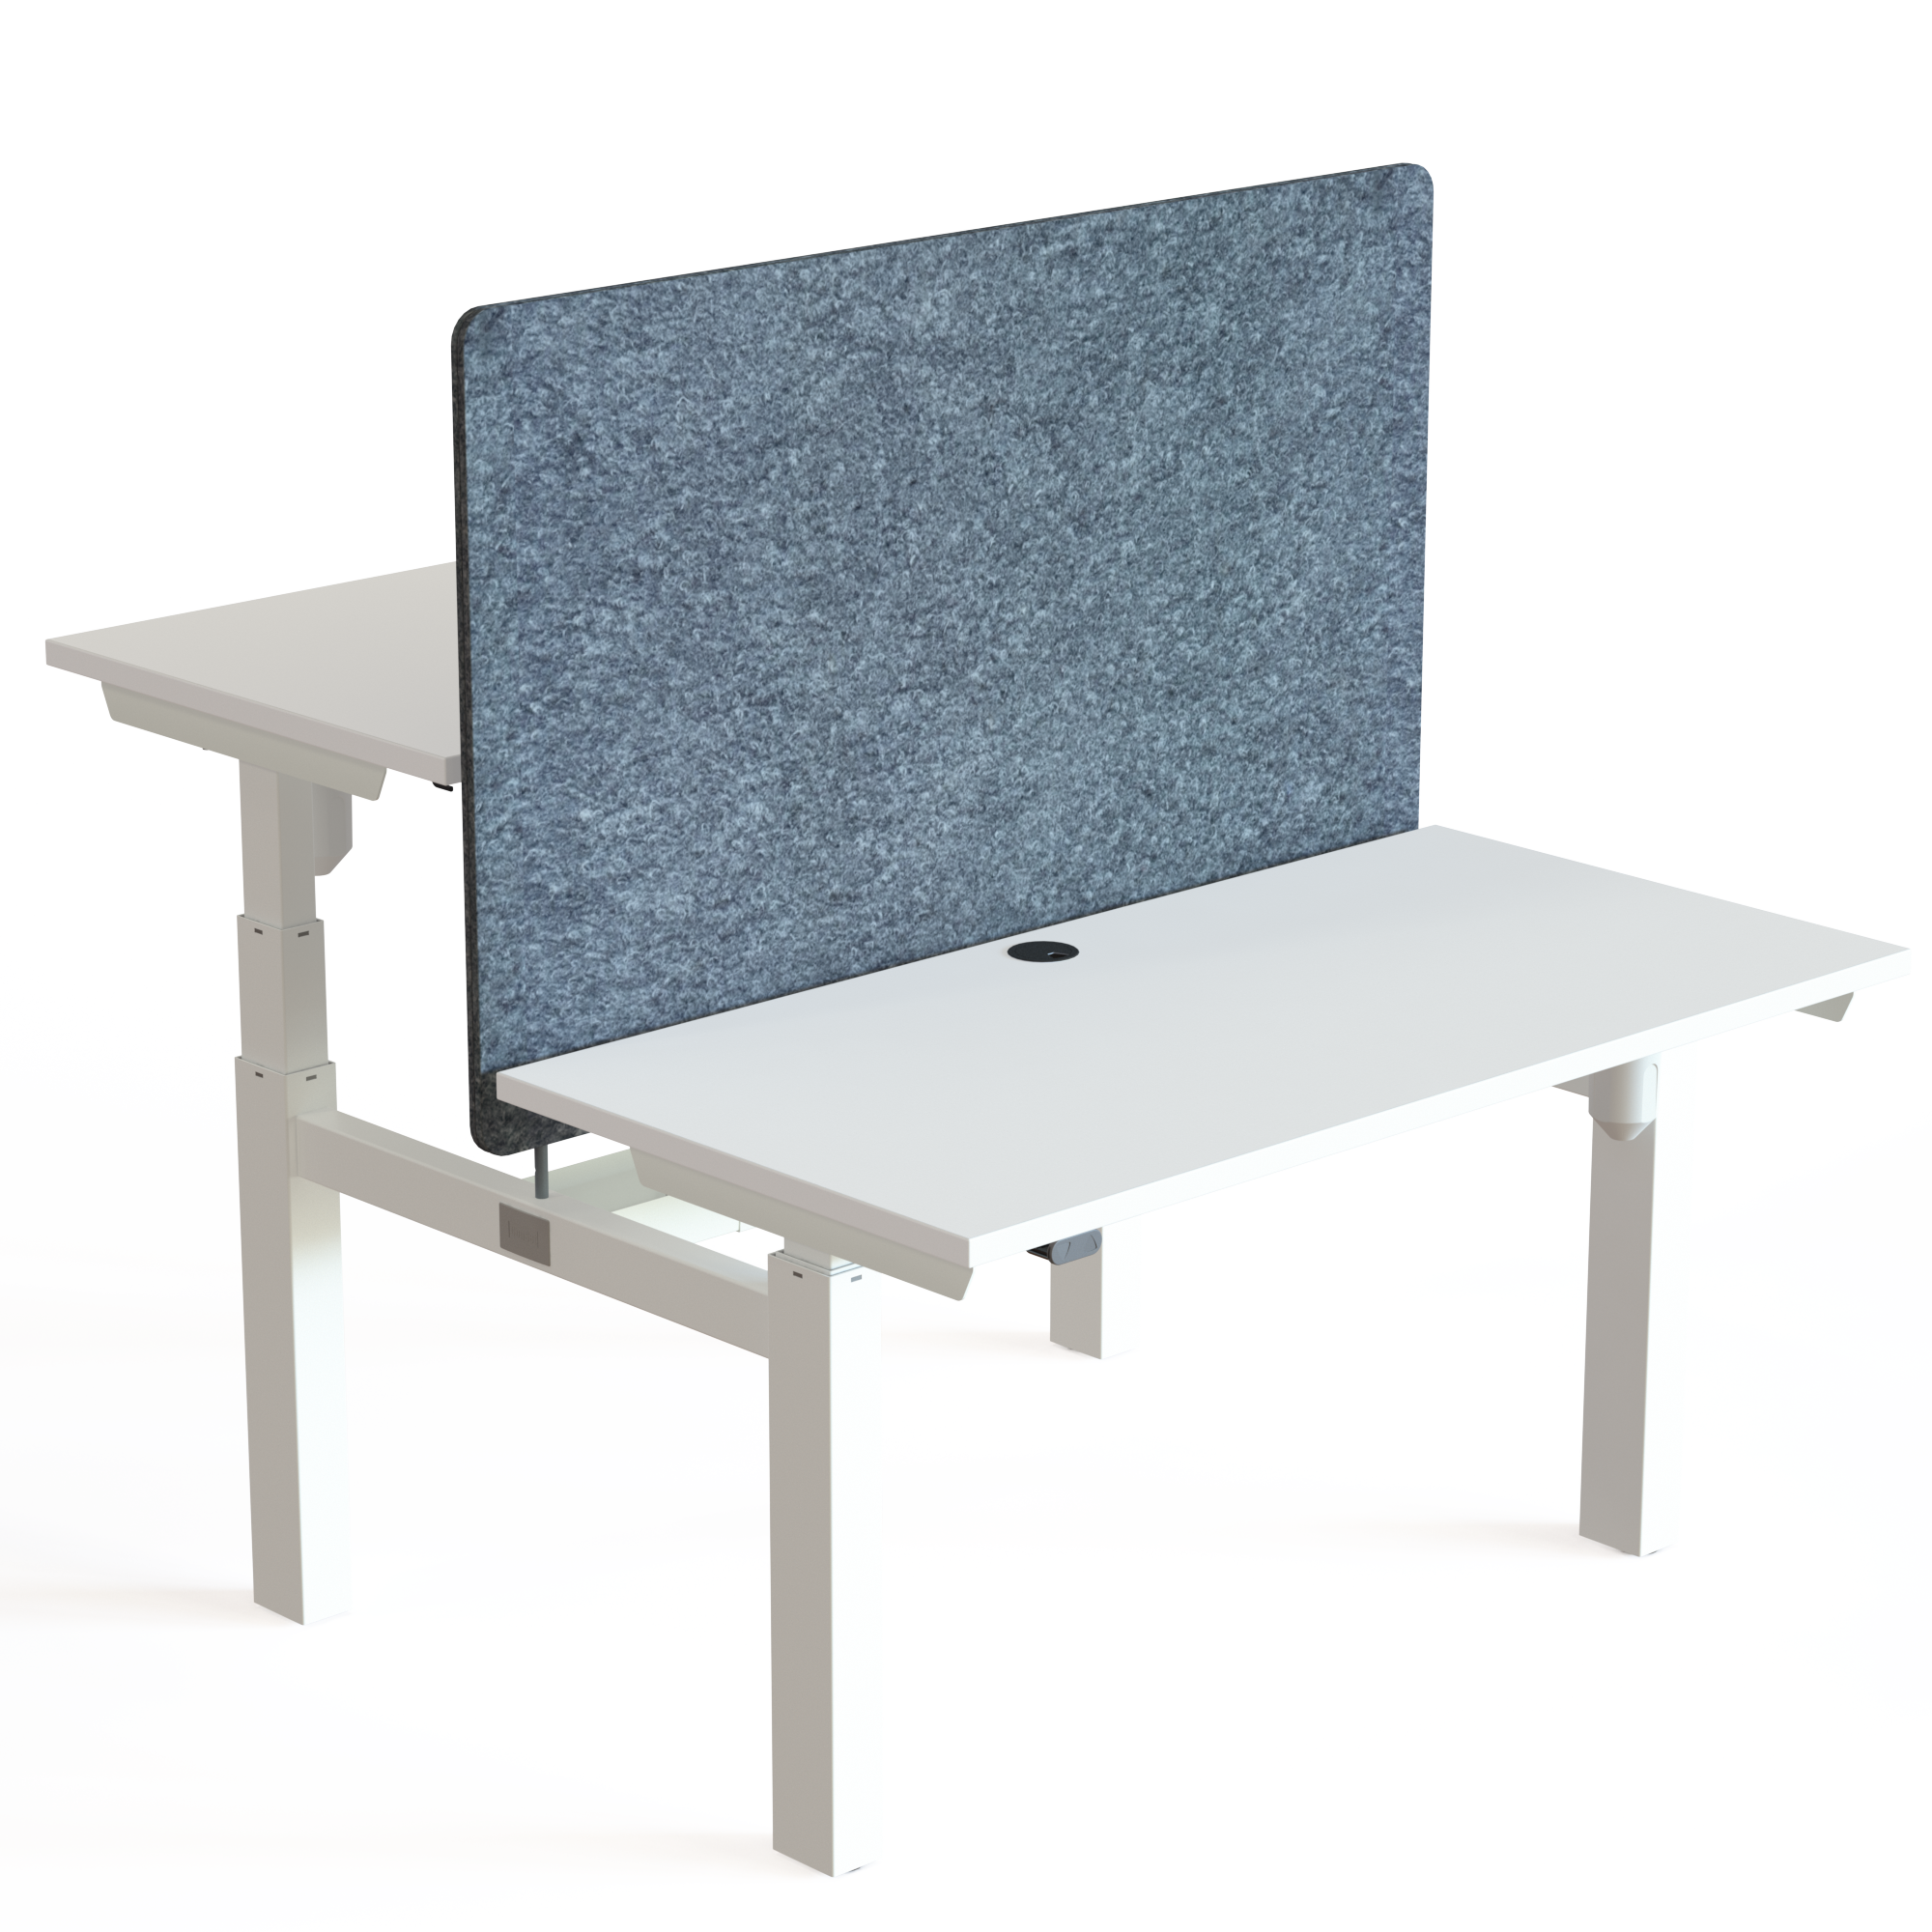 Electric Adjustable Desk | 120x60 cm | White with white frame